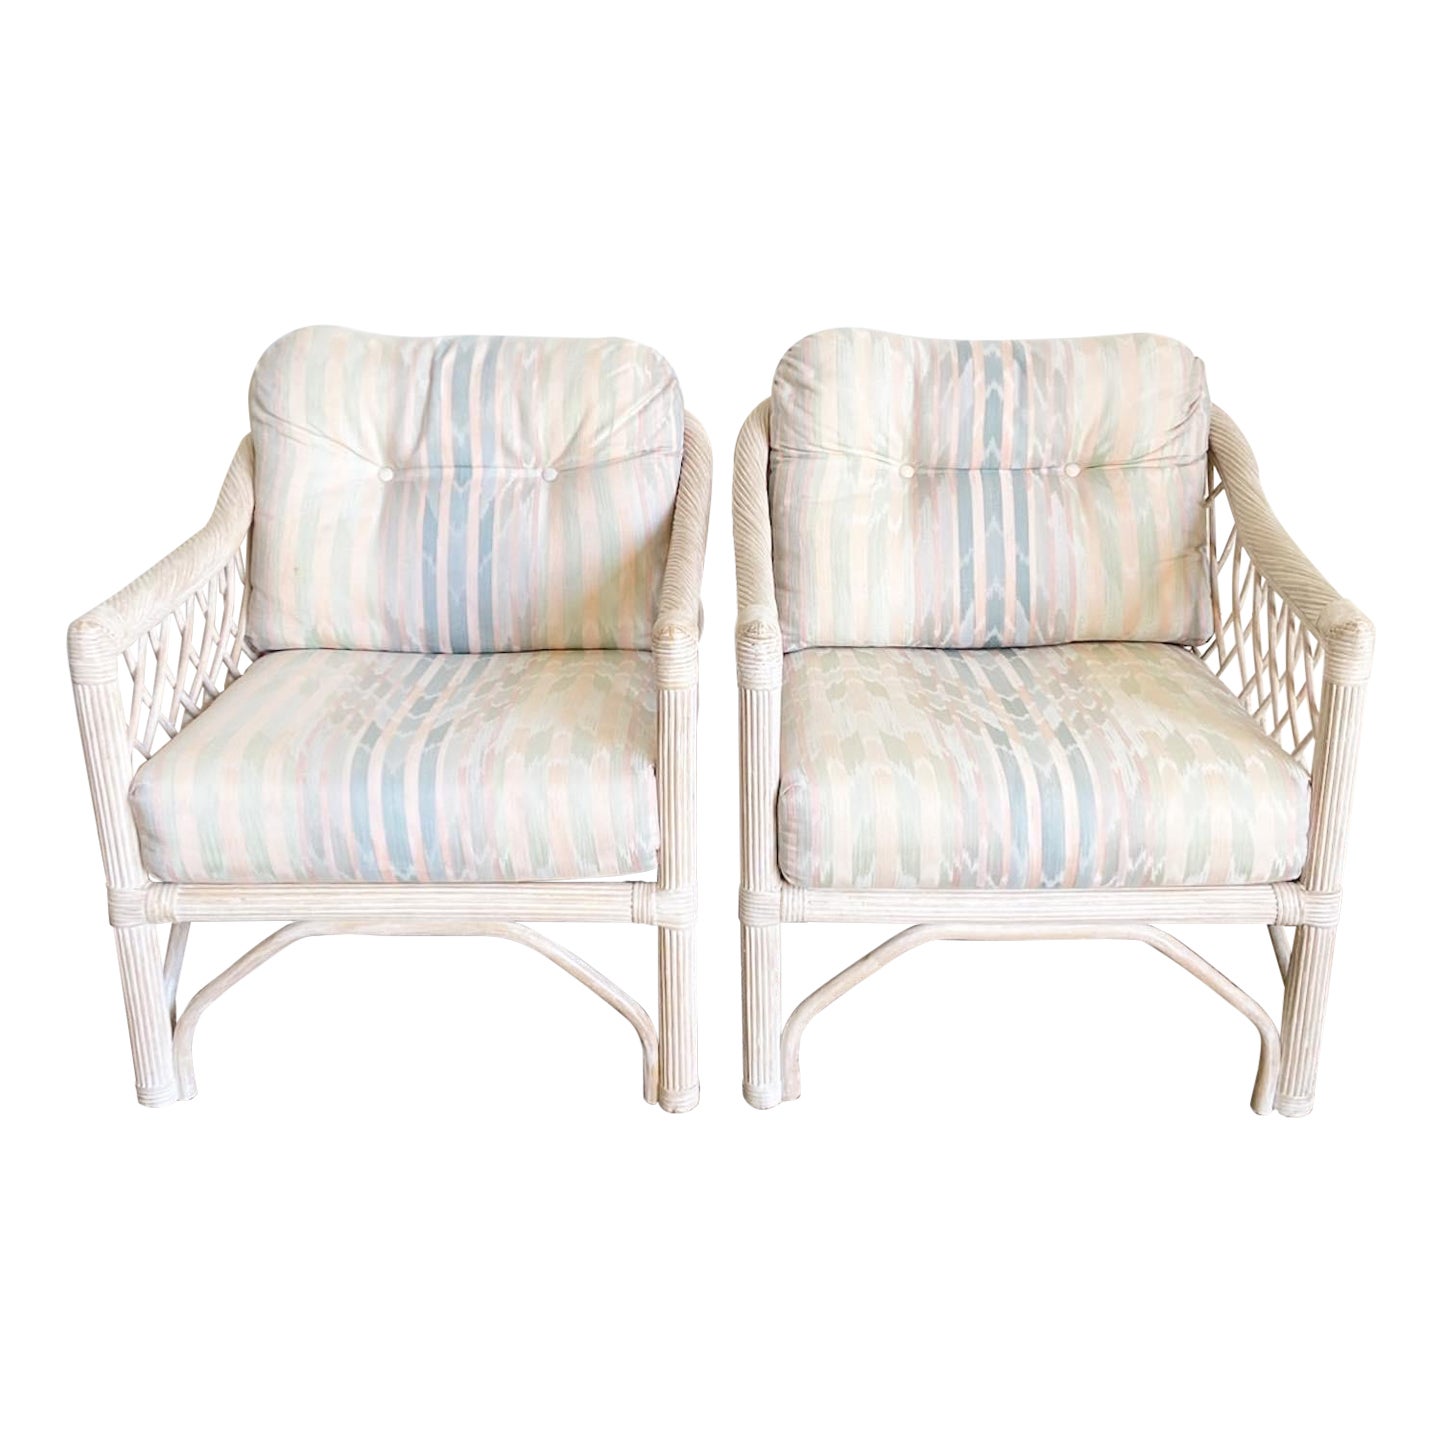 Boho Chic Rattan and Pencil Reed Arm Chairs by Henry Link - a Pair For Sale